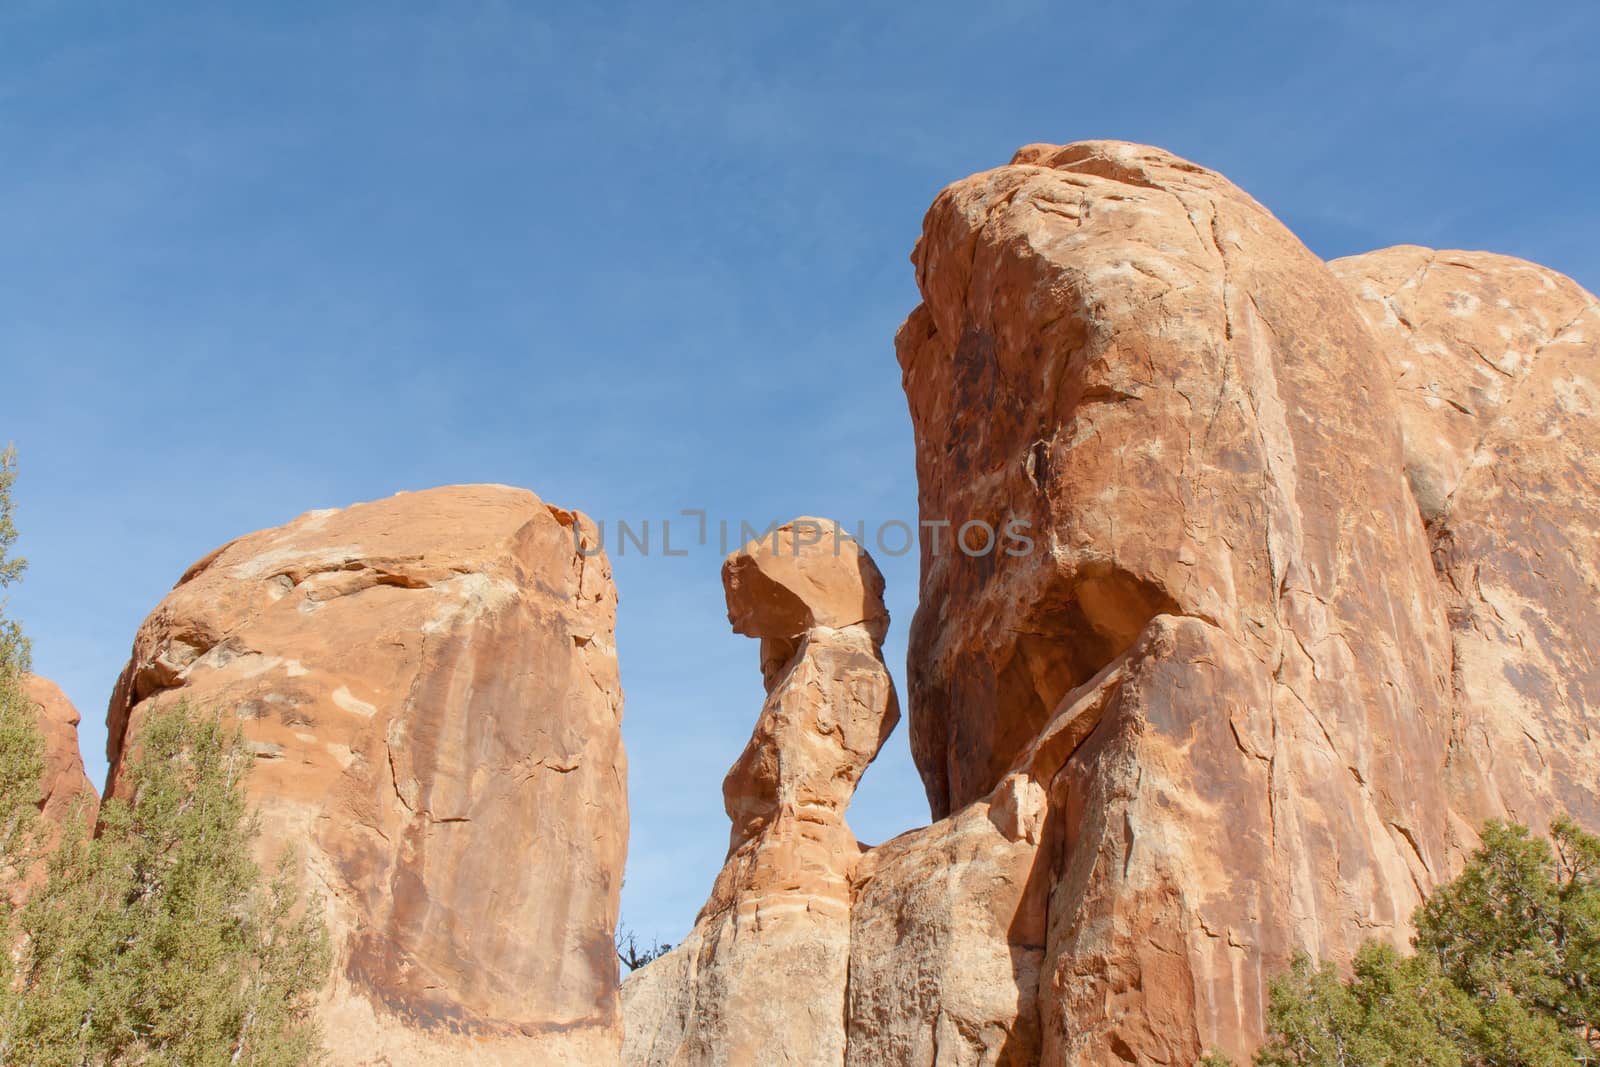 It appears that one rock is shaking its fist at the other. Arches National Park works on the imagination.